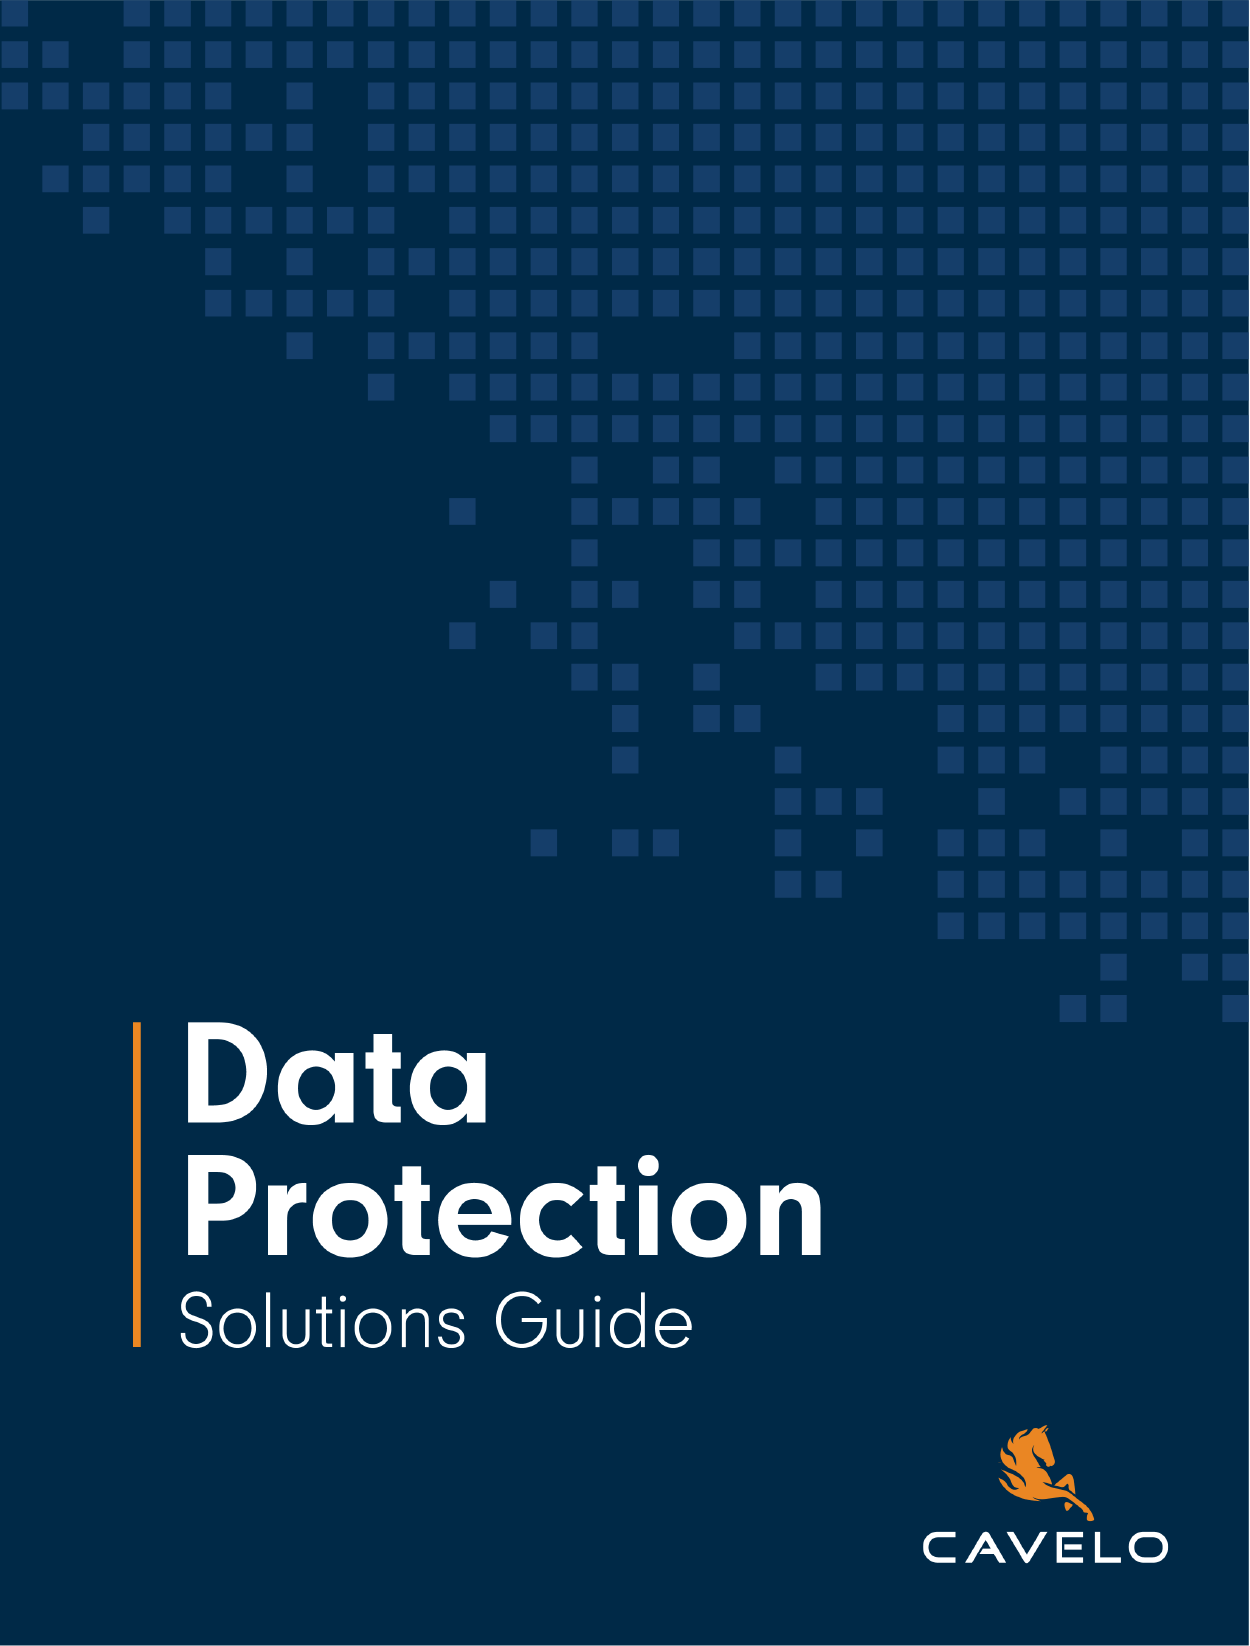 Data Protection Solutions Guide